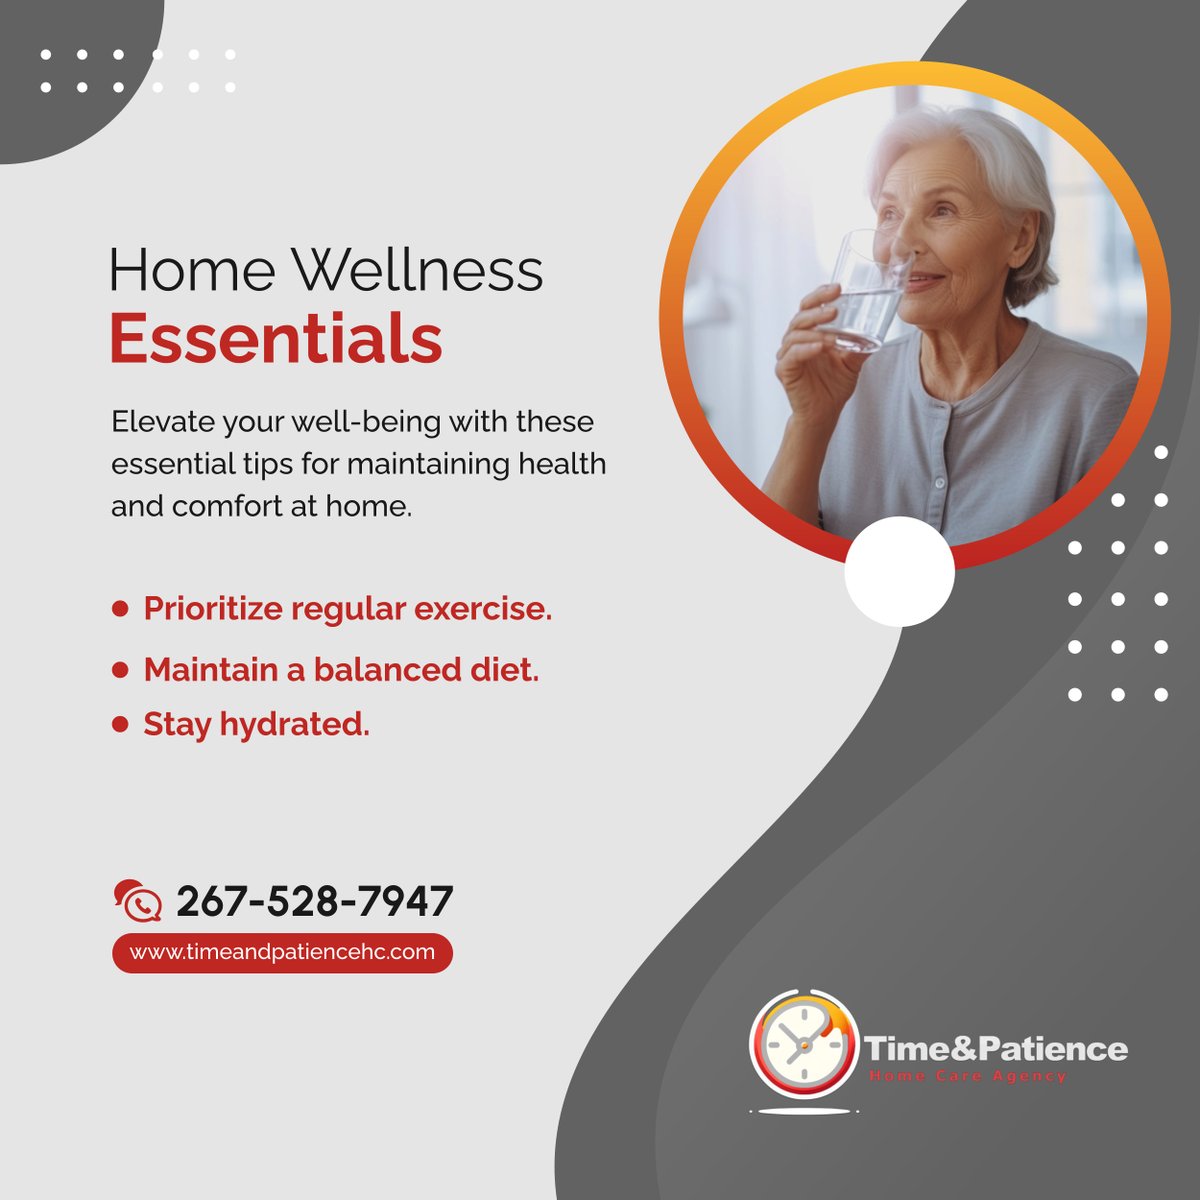 Improve your well-being with these simple yet effective home wellness tips. Start implementing them today for a healthier tomorrow!

#PhiladelphiaPA #HomeCare #WellnessTips